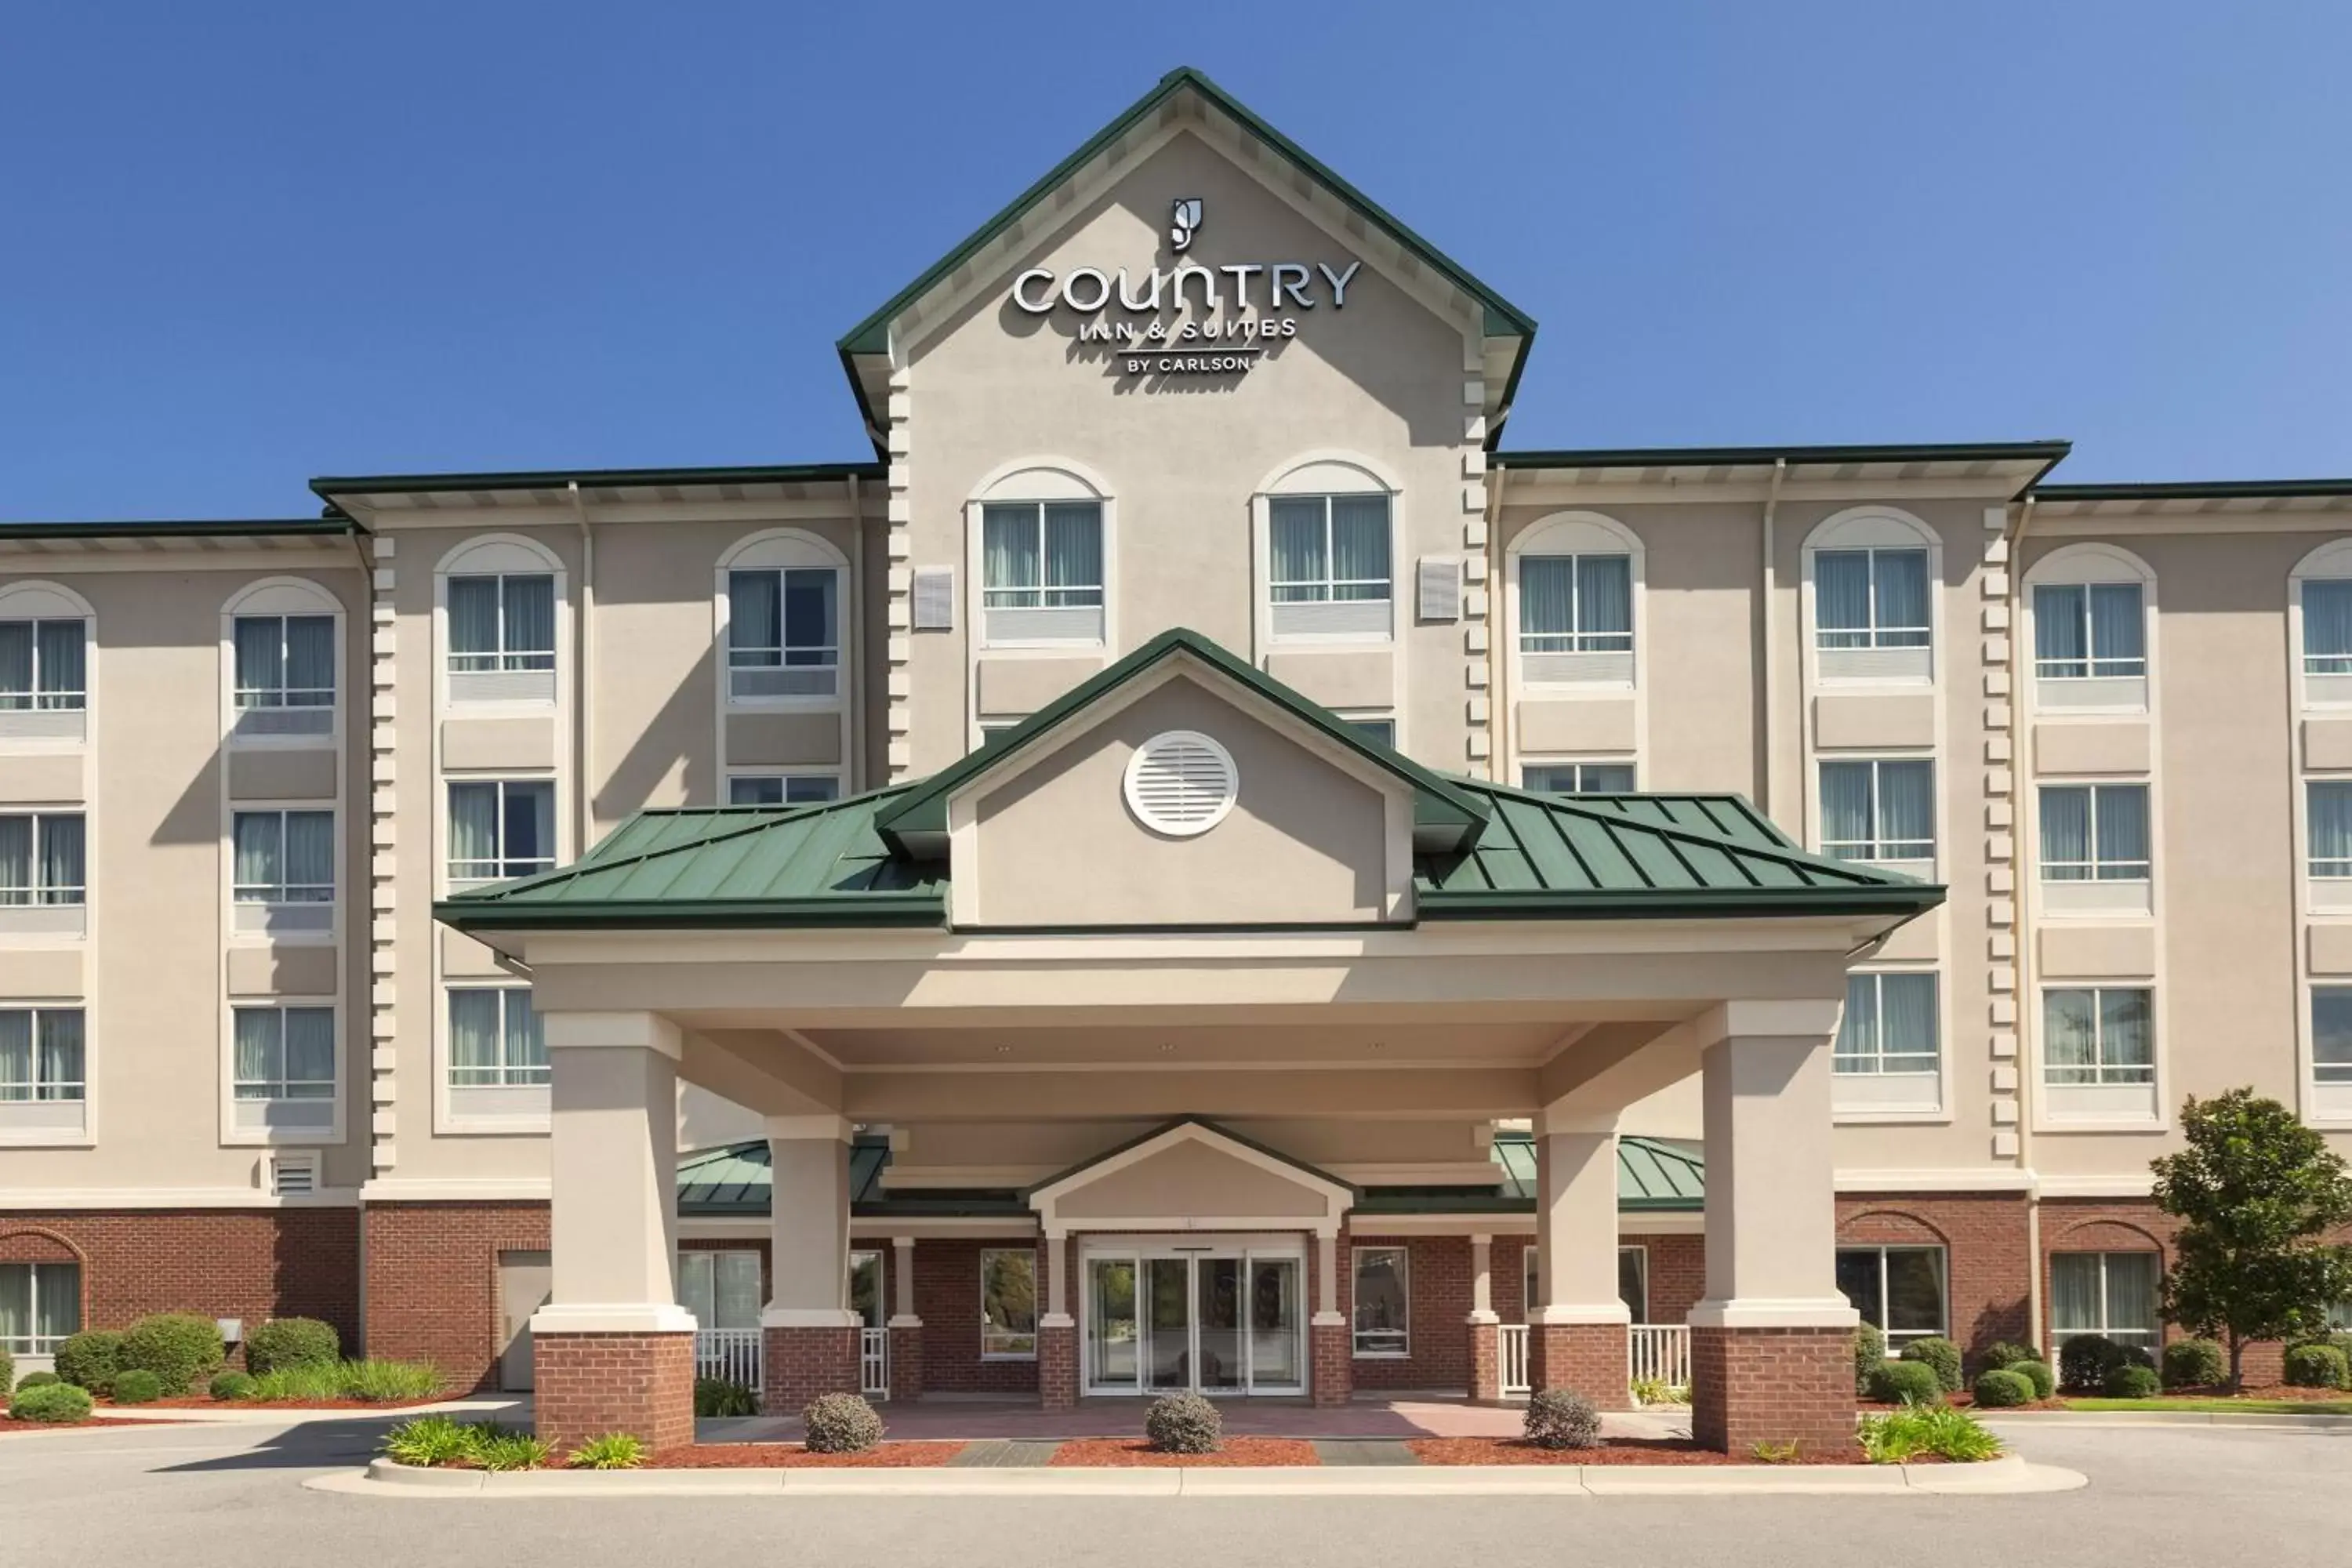 Property Building in Country Inn & Suites by Radisson, Tifton, GA